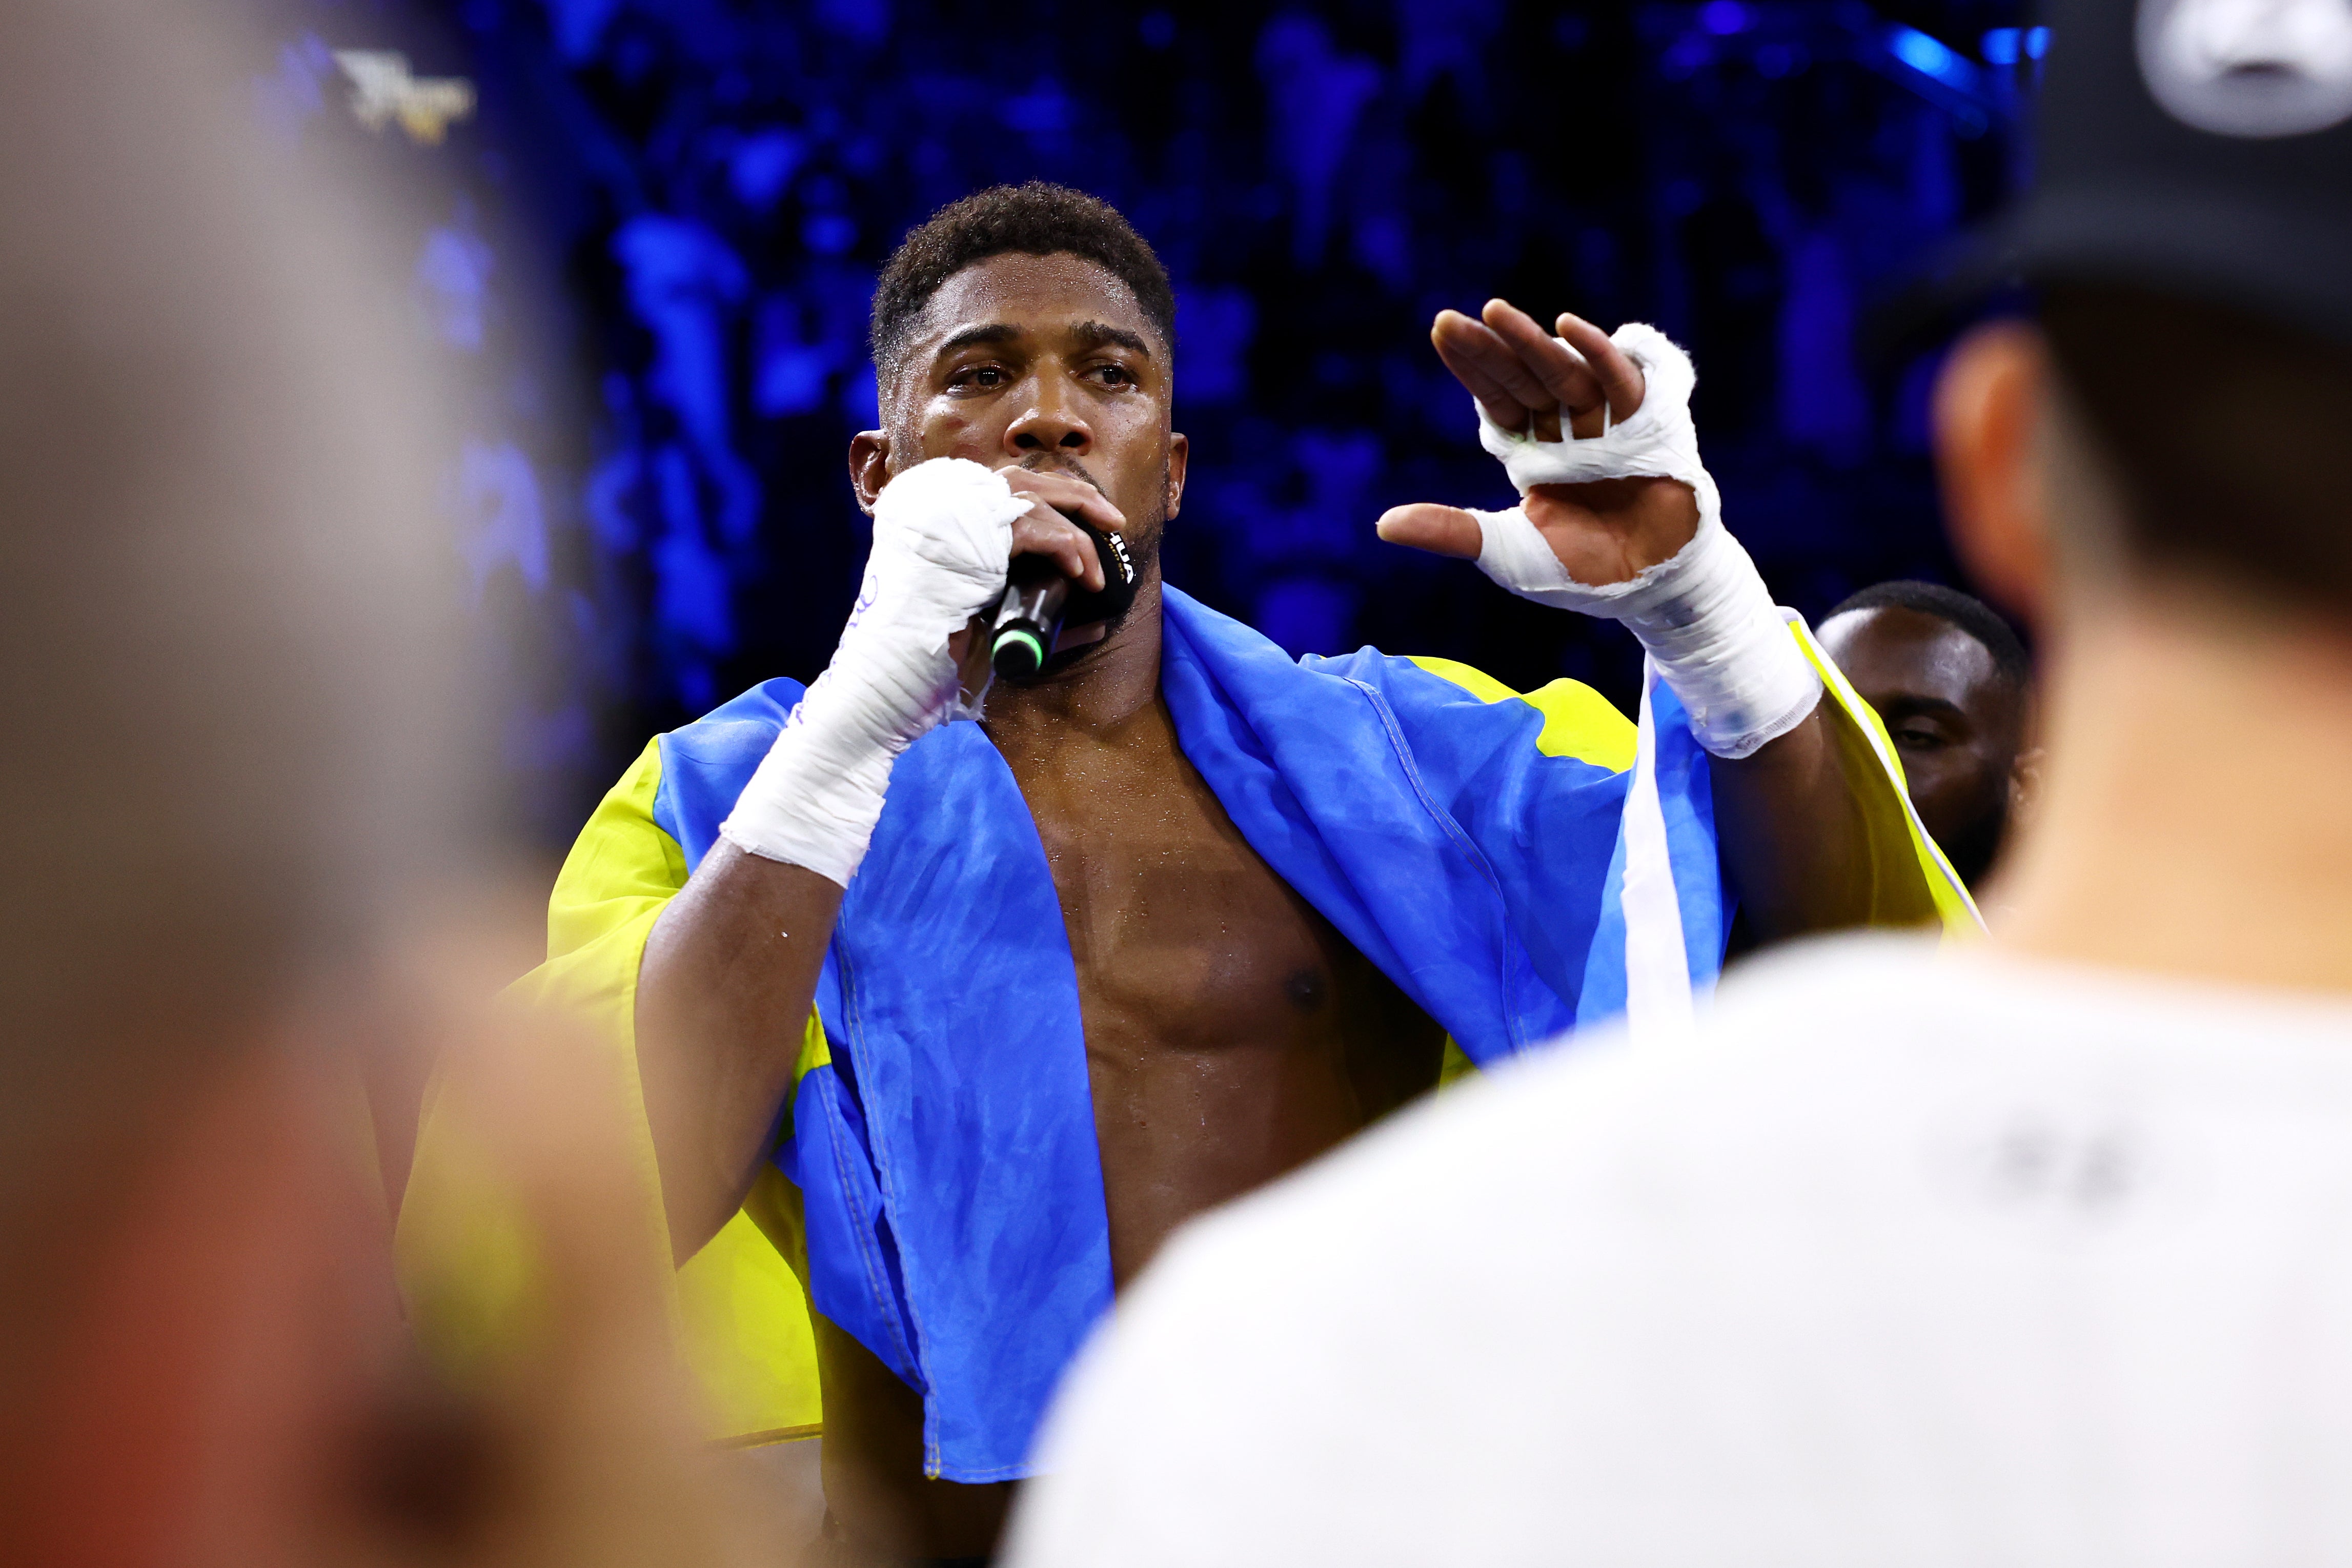 Anthony Joshua took centre stage following defeat